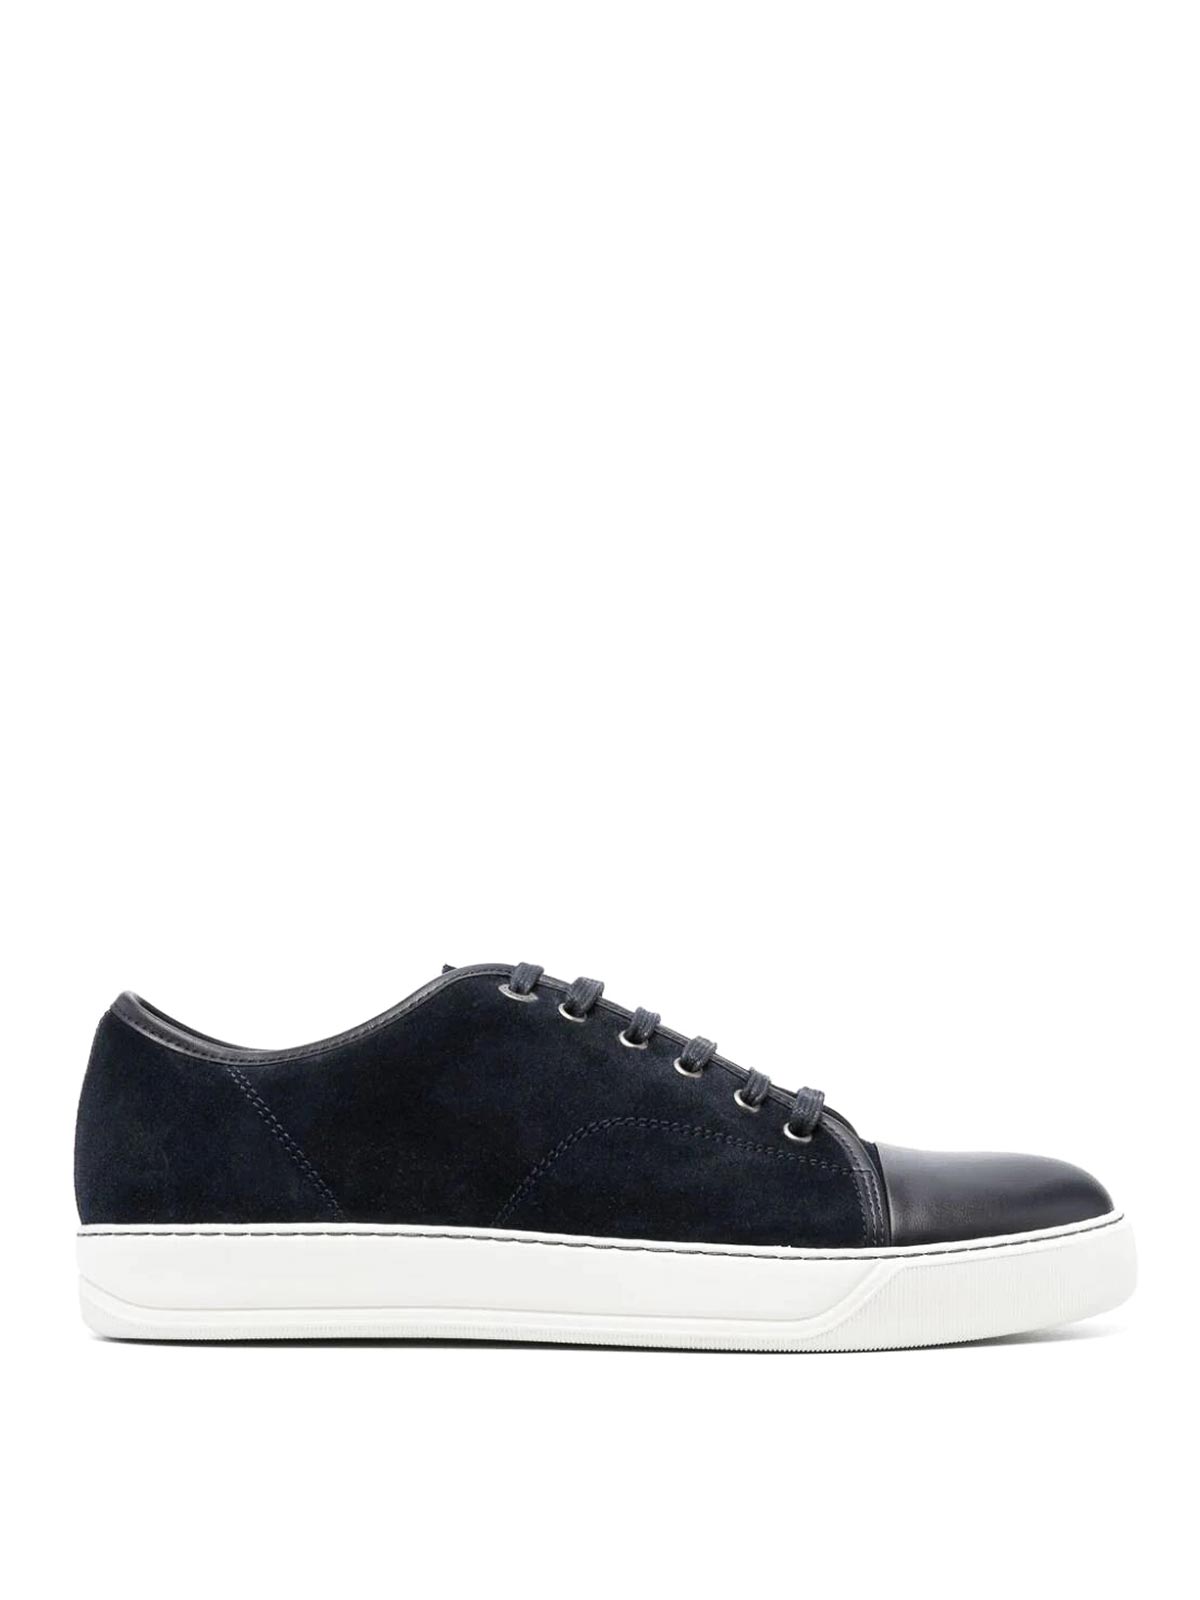 Lanvin Suede And Nappa Captoe Low To Sneaker In Blue